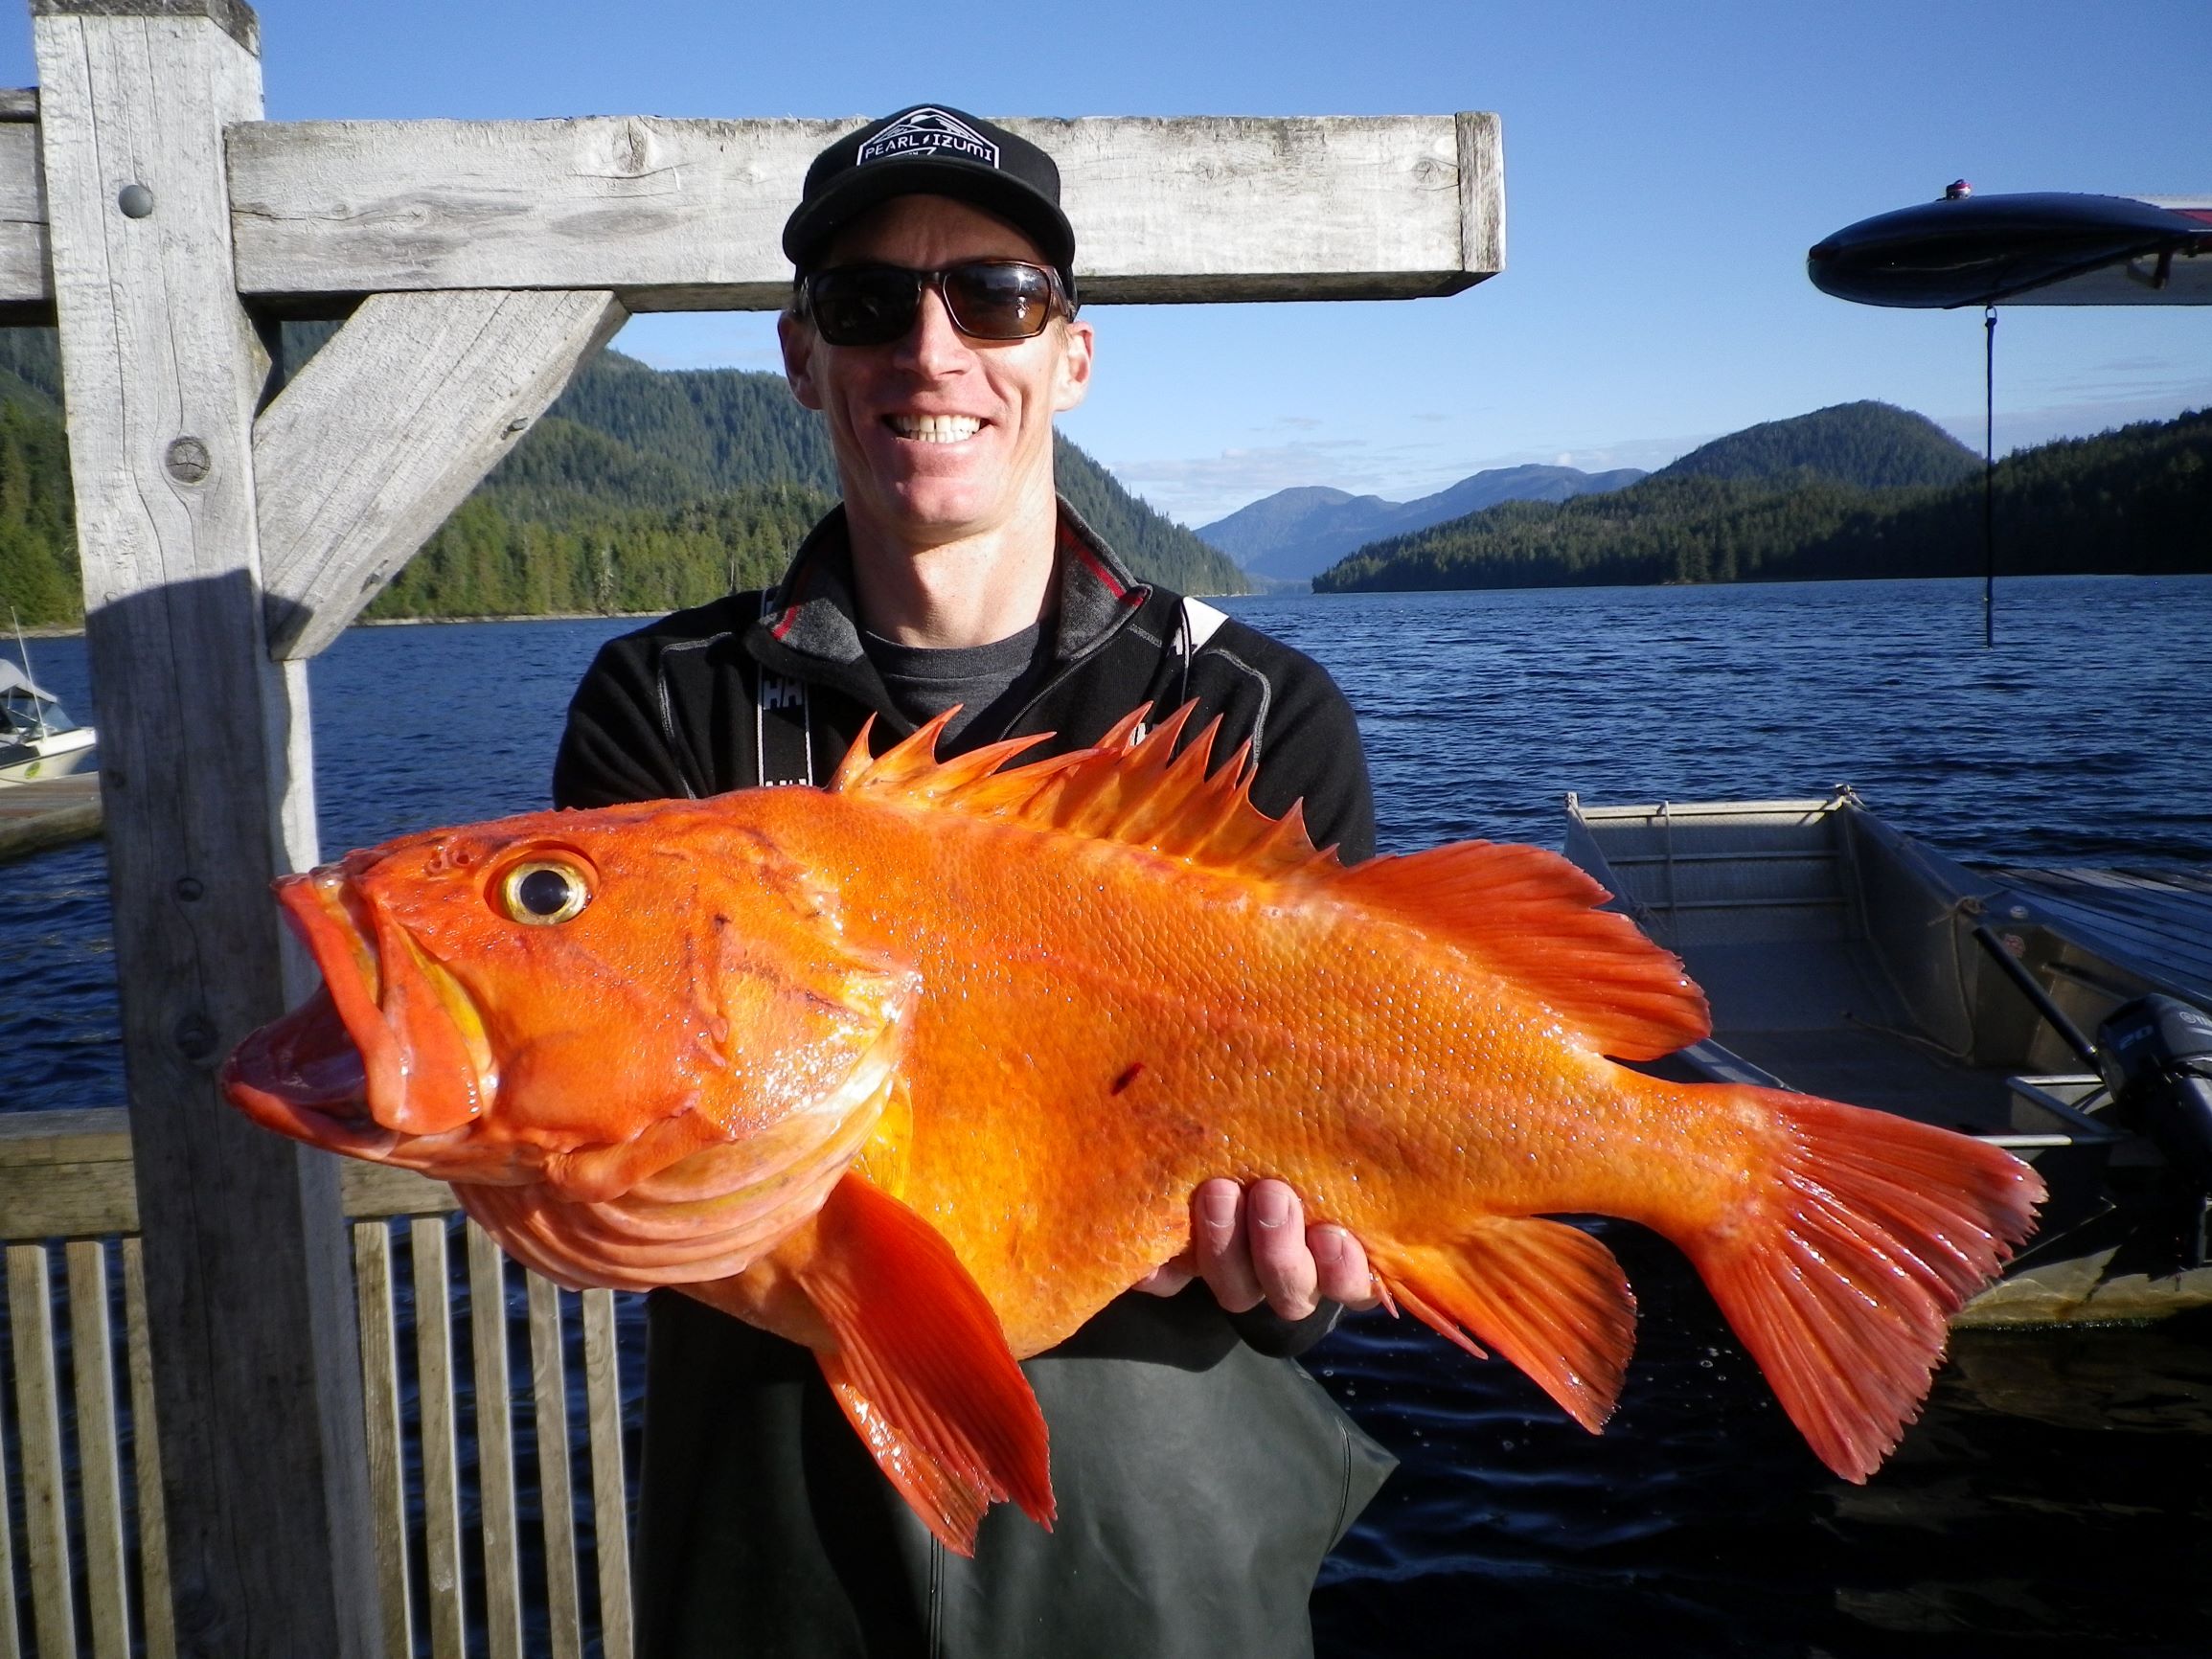 A fisherman standing on the end of a dock, holding up a Yellow eye Rock fish.